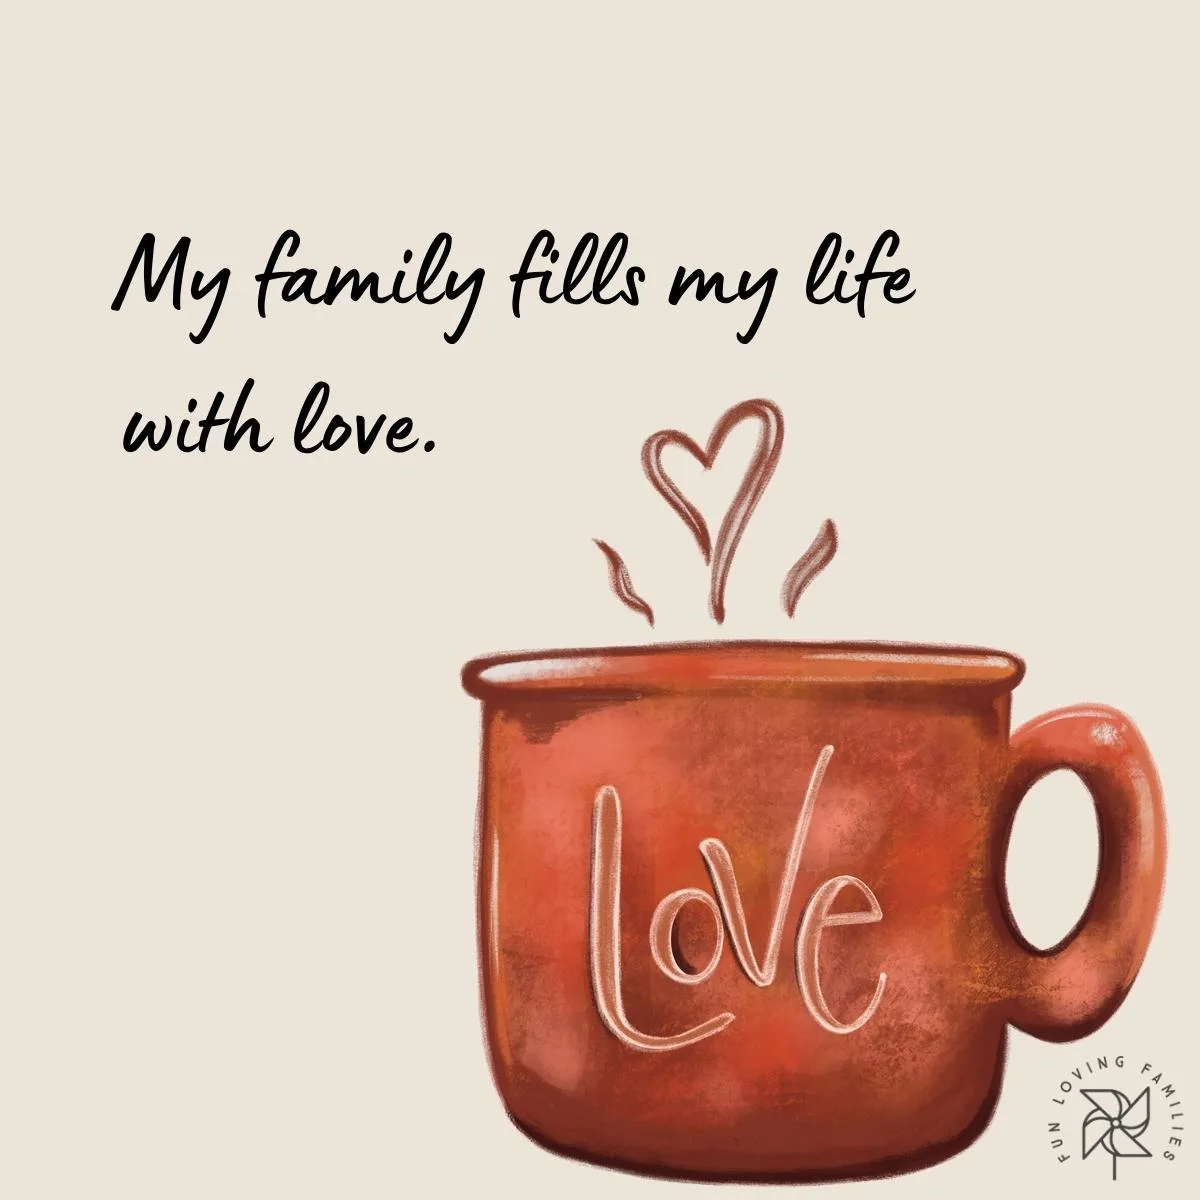 My family fills my life with love affirmation